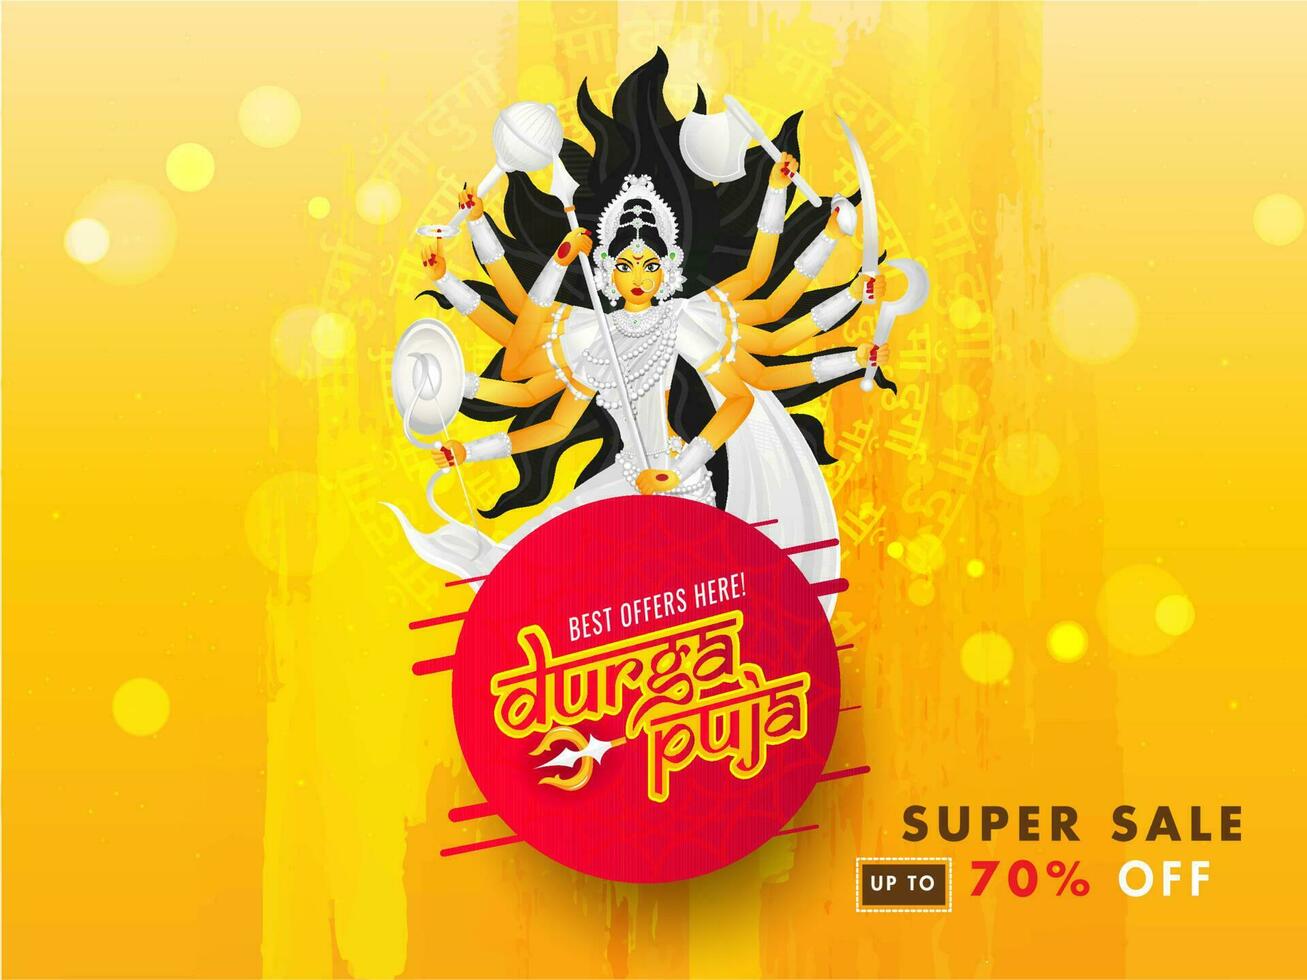 Advertising banner or poster design with illustration of Goddess Durga and discount offer for Durga Puja Super Sale. vector